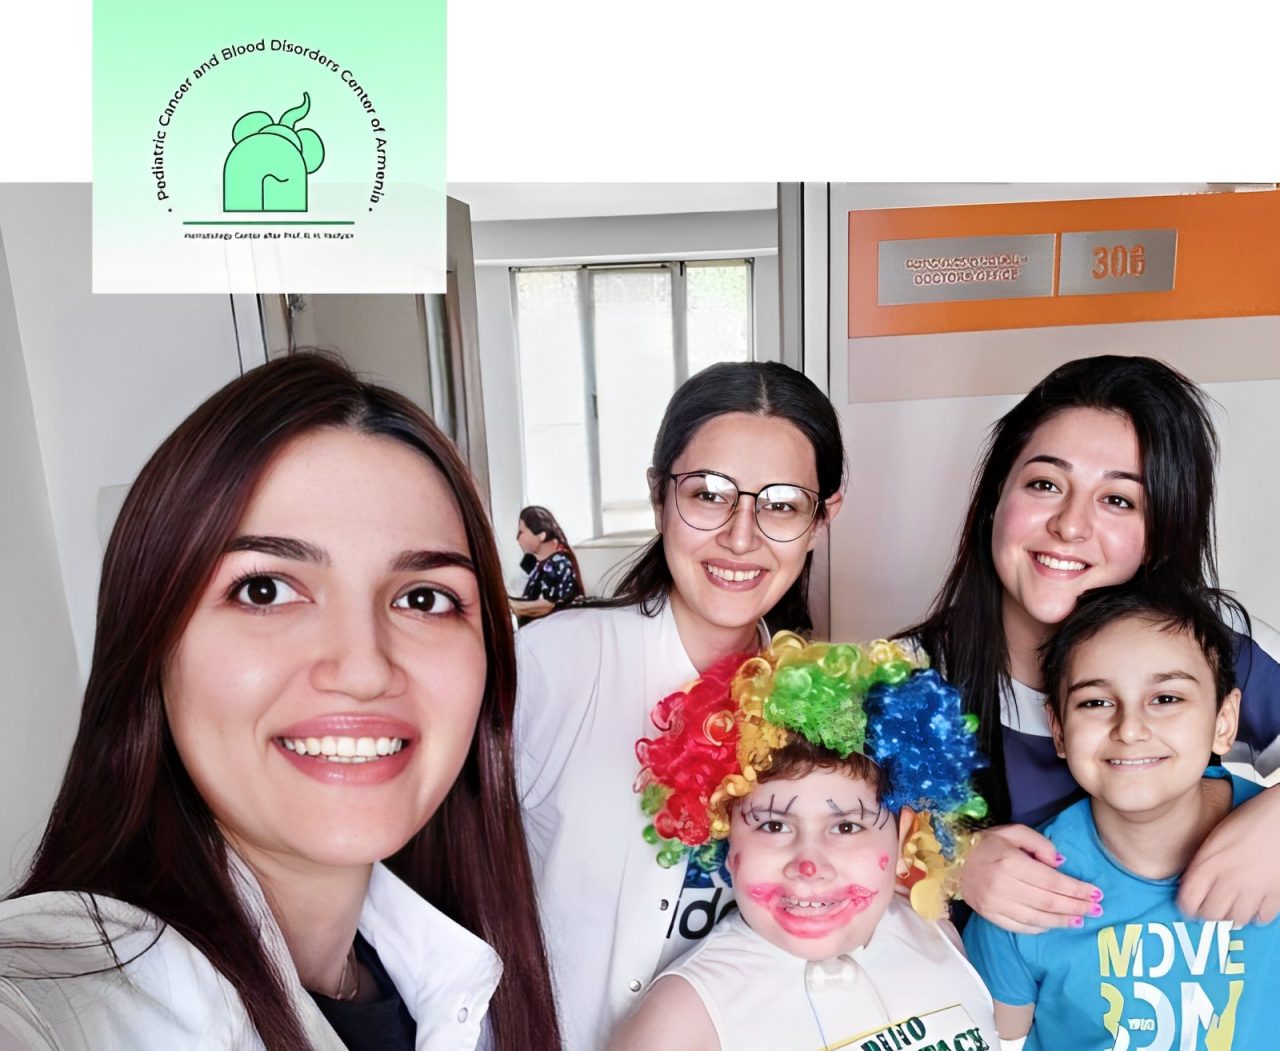 Using this opportunity, we remind once again that love is contagious, not cancer. – Pediatric Cancer and Blood Disorders Center of Armenia